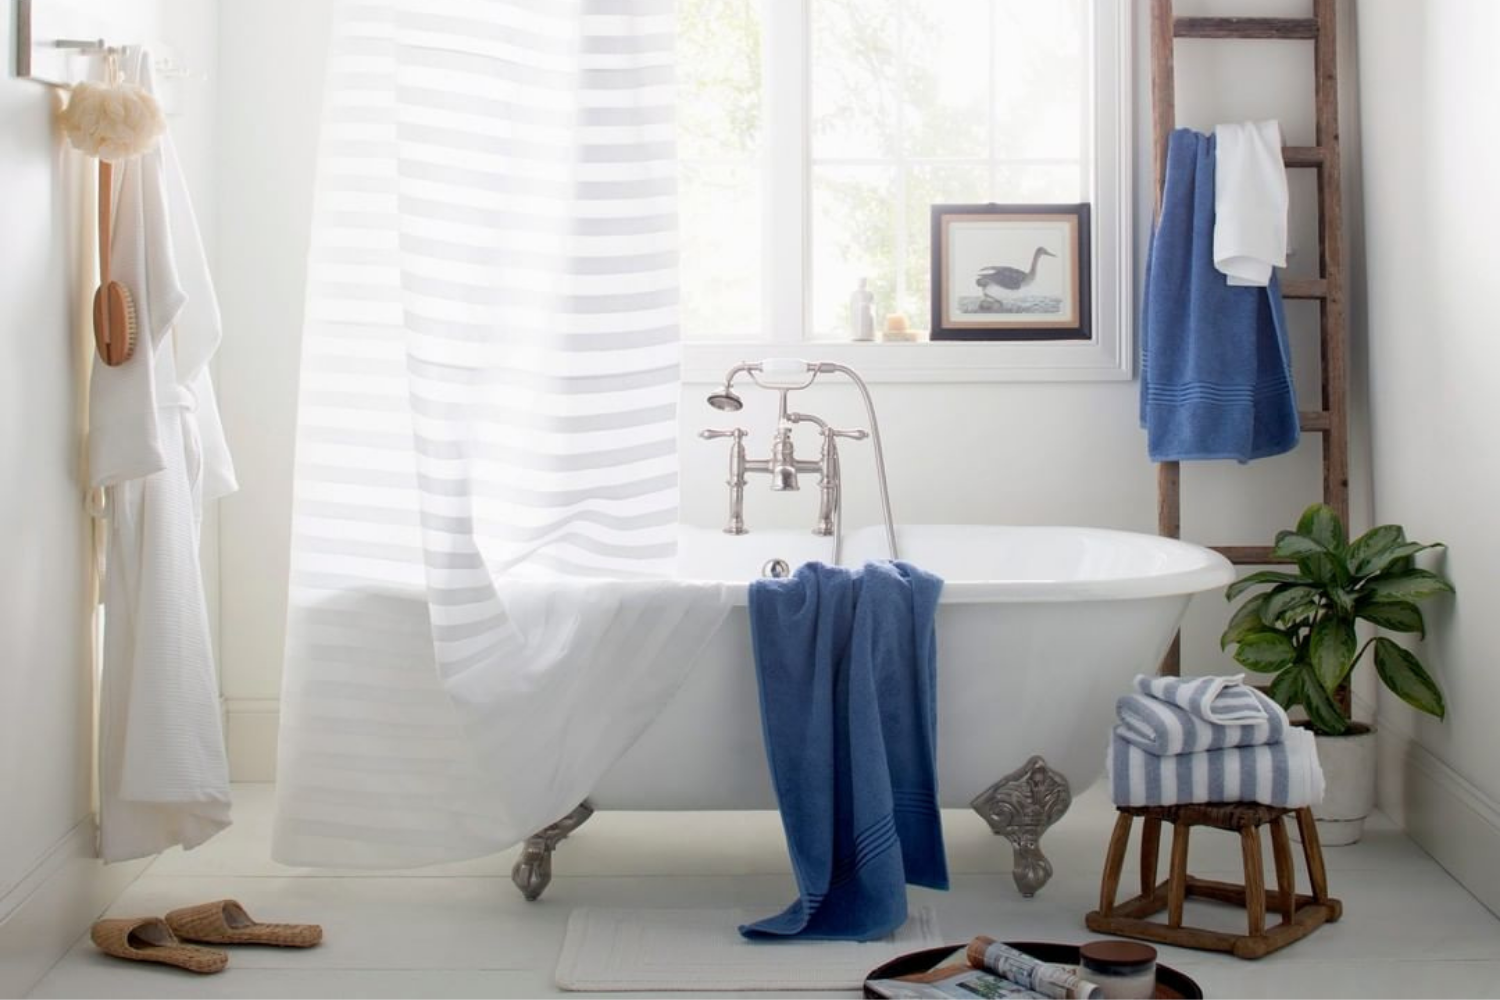 Add a Little Farmhouse Flair to Your Bathroom With These 20 Design Ideas